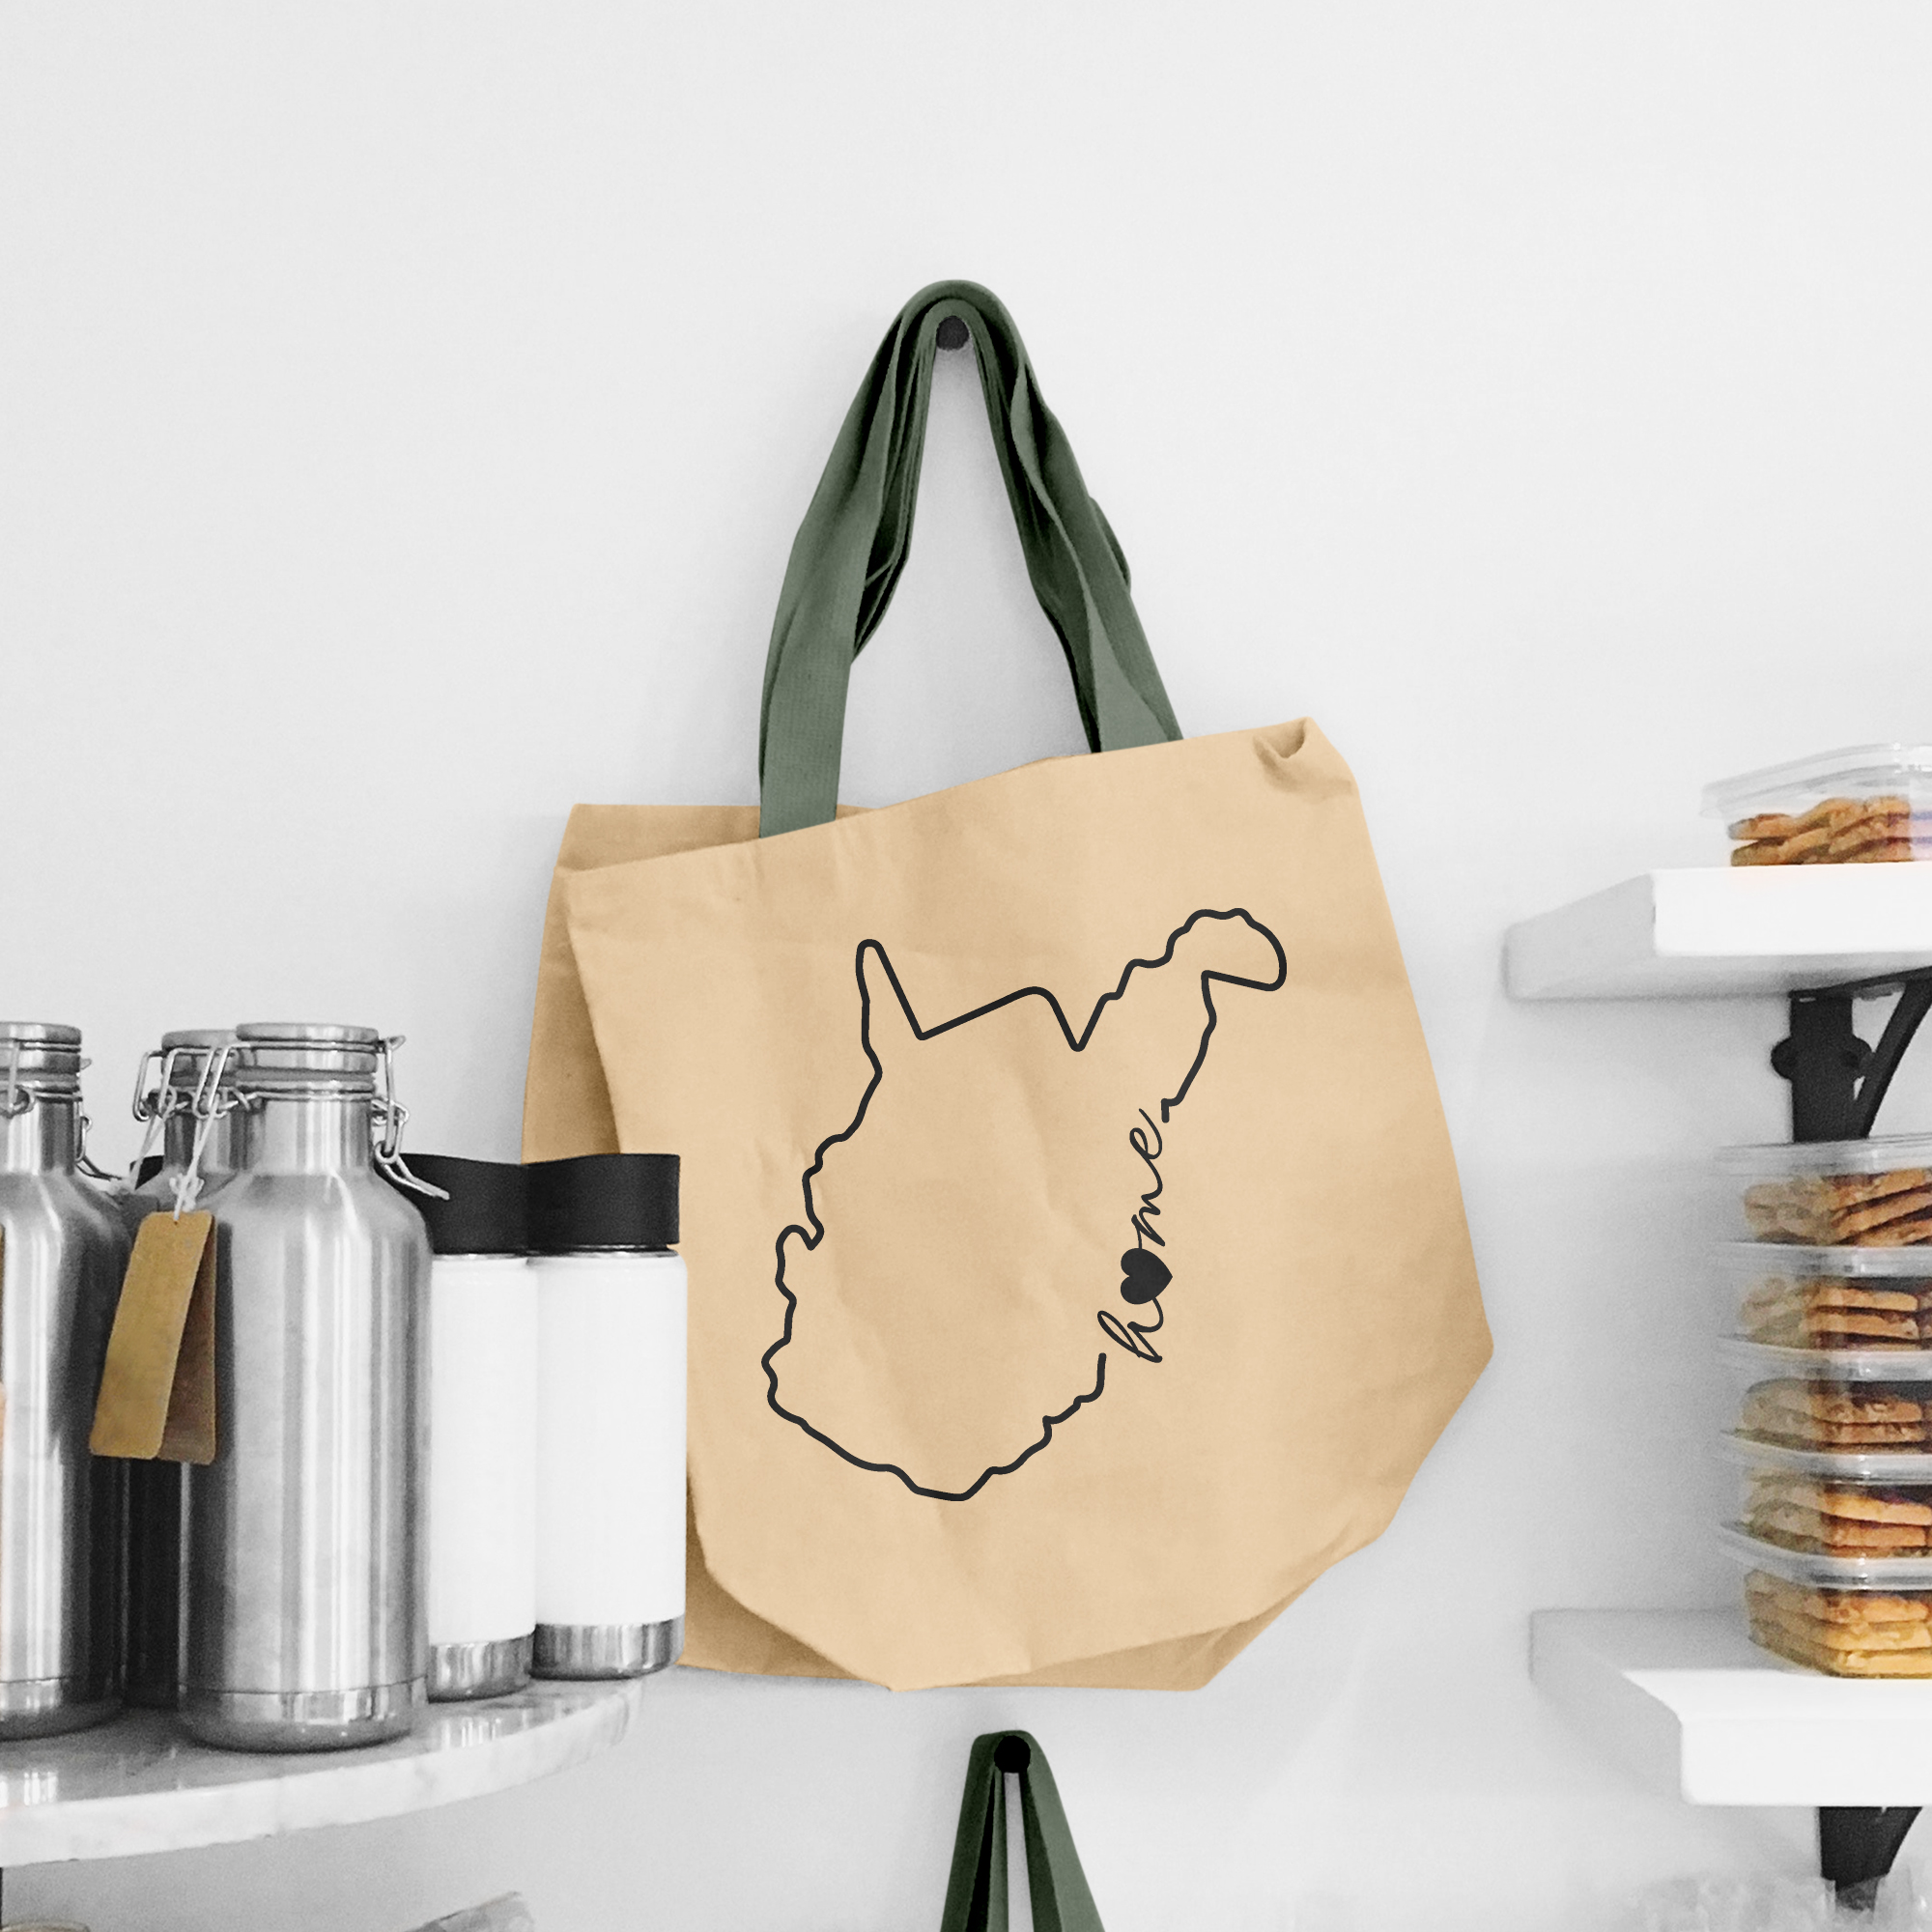 Black illustration of map of West Virginia on the beige shopping bag with dirty green handle.